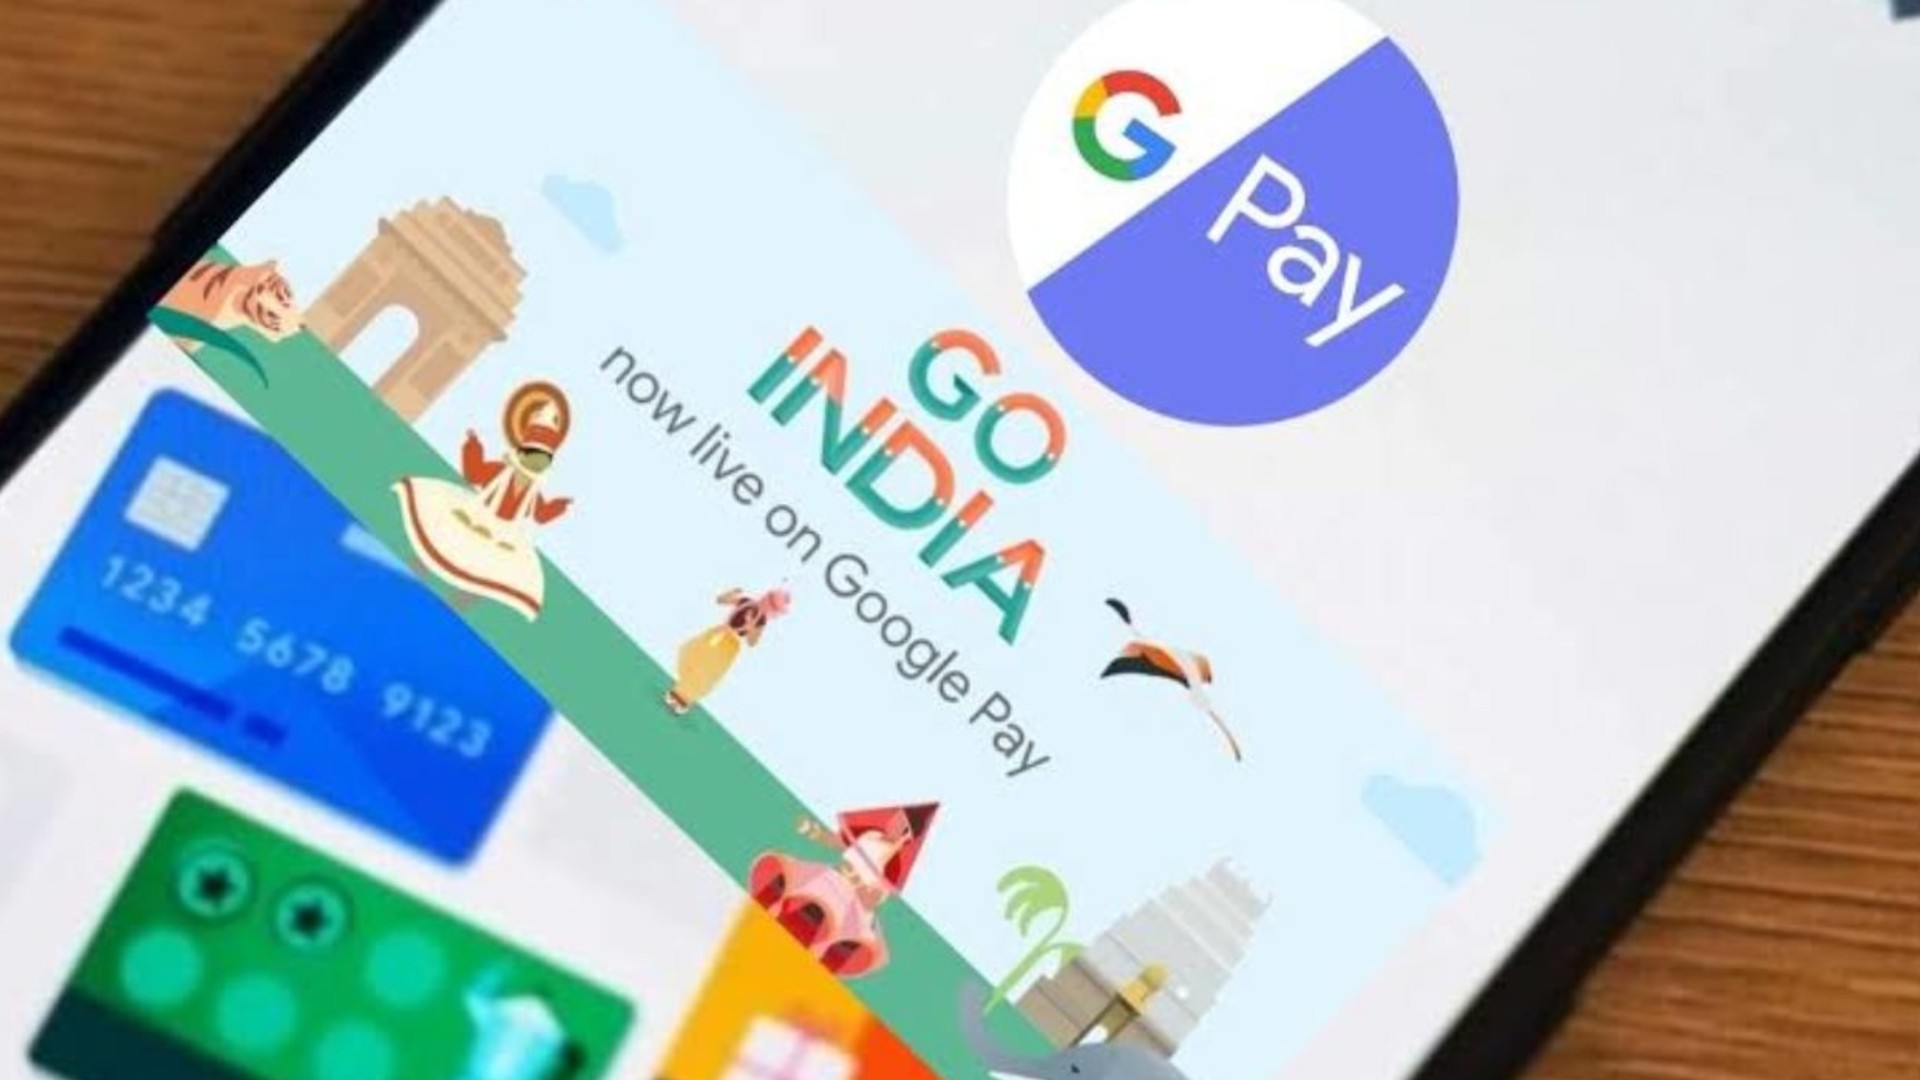 With the Partnership, Google Pay will offer FDs Through Setu, a Fintech Startup